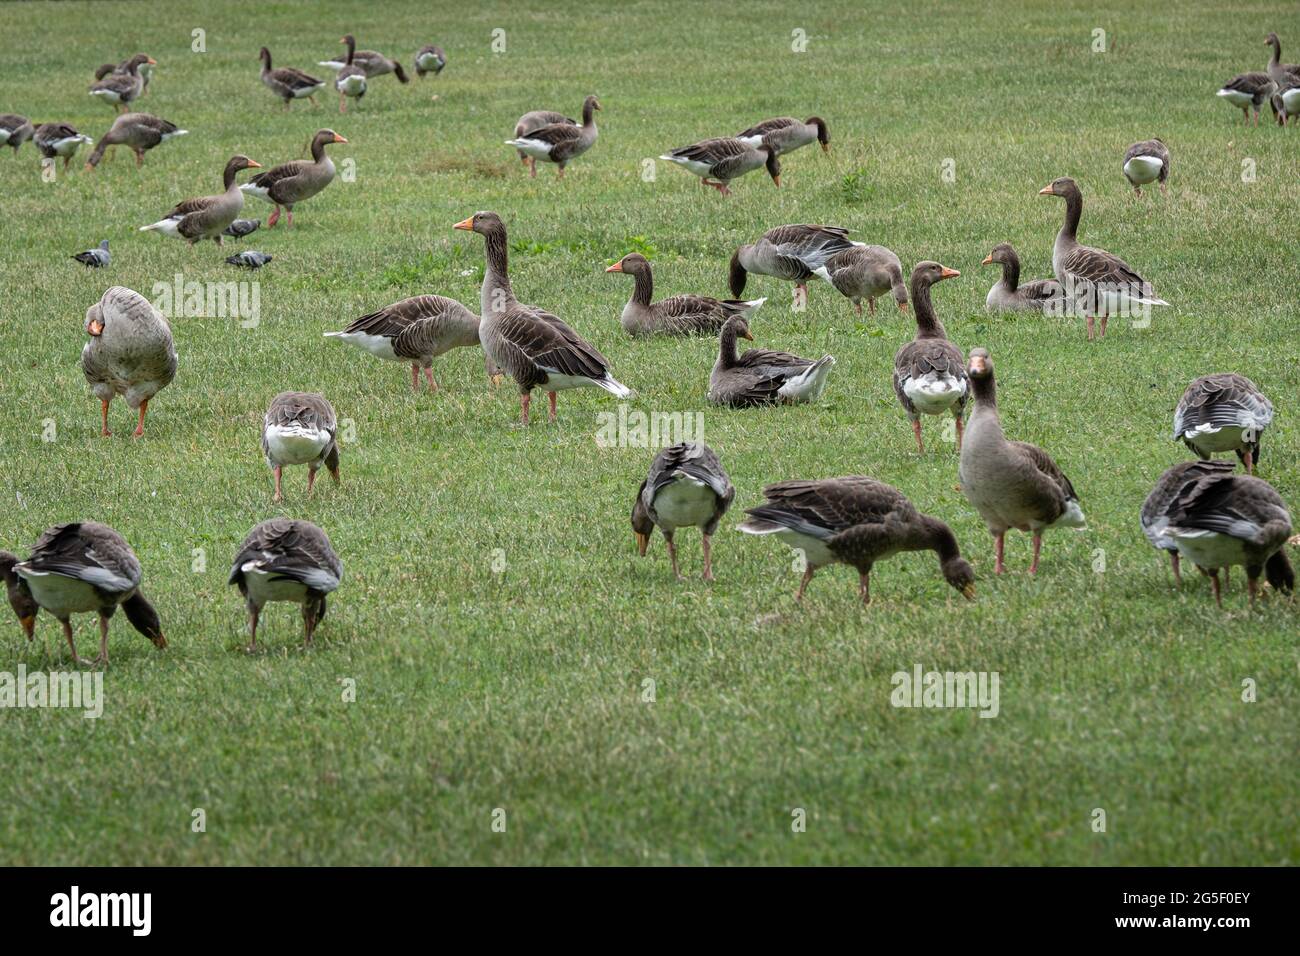 Lyon (France), June 25, 2021. A group of geese on a meadow Stock Photo -  Alamy